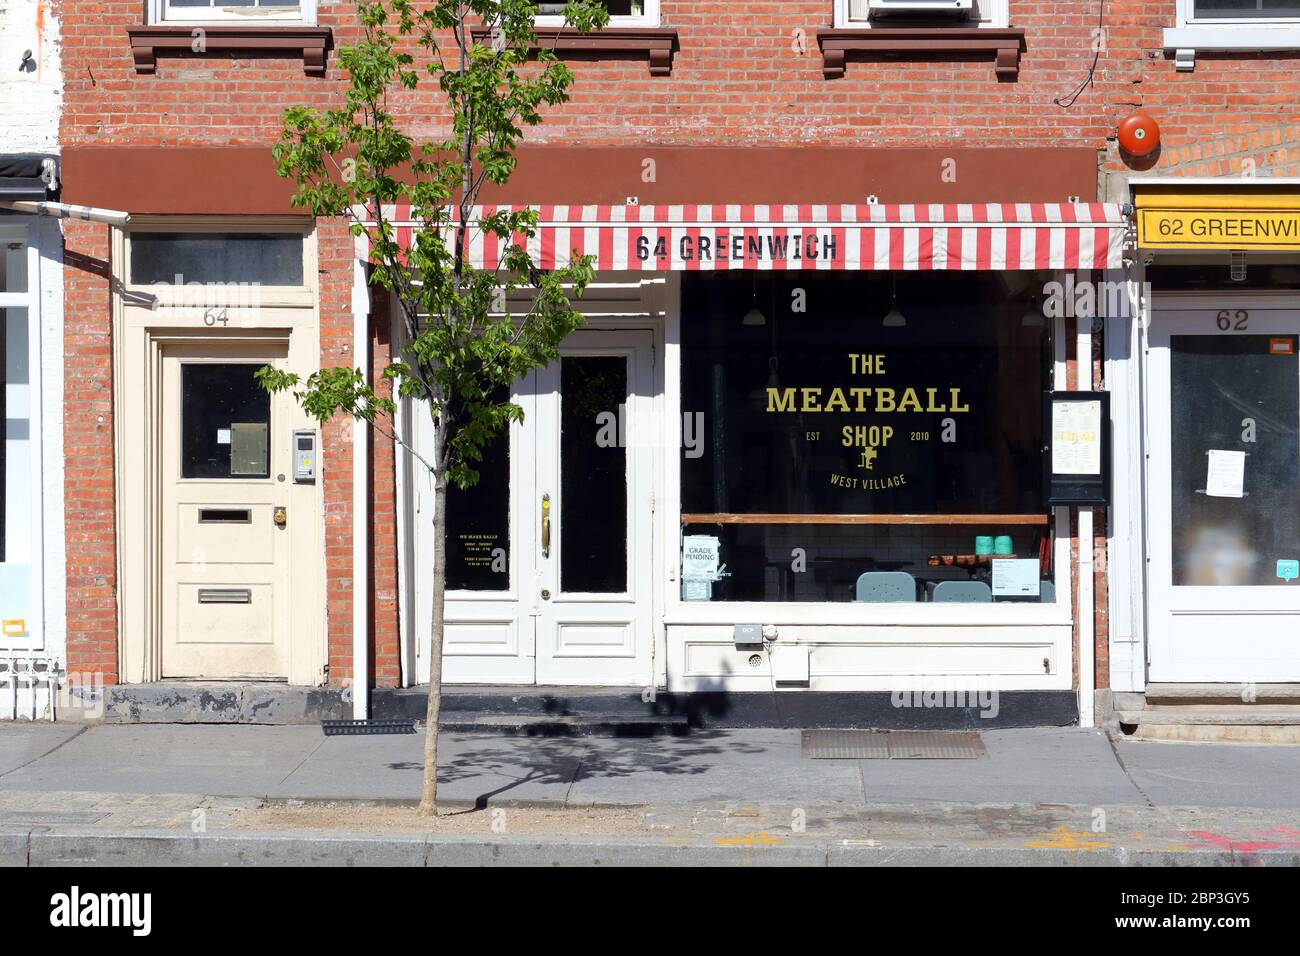 [historical storefront] The Meatball Shop, 64 Greenwich Ave, New York, NYC storefront photo of a meatball restaurant in Manhattan's West Village. Stock Photo